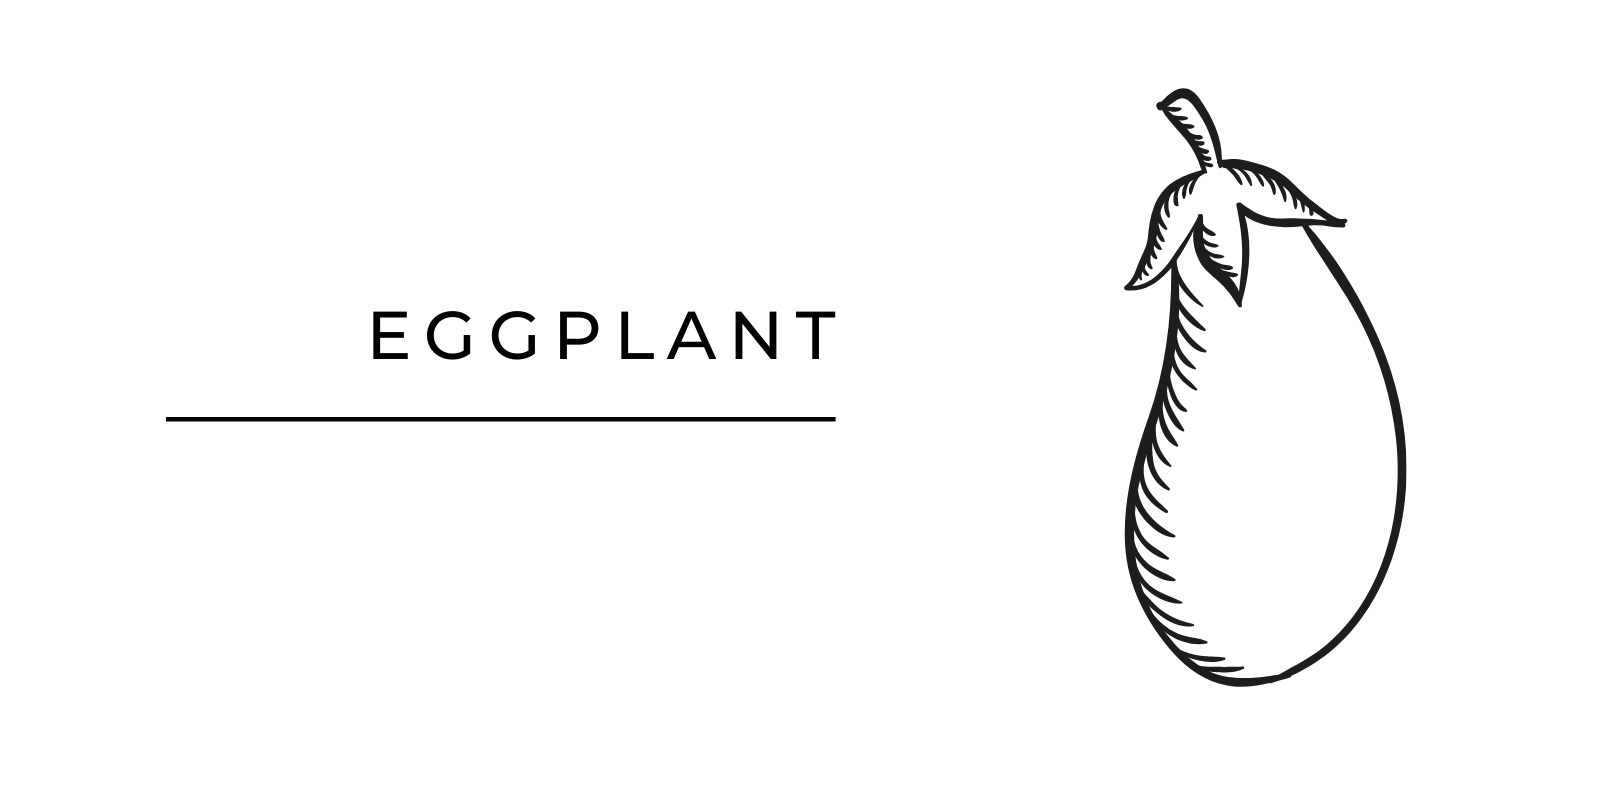 Eggplant Illustration Images | Free Photos, PNG Stickers, Wallpapers &  Backgrounds - rawpixel